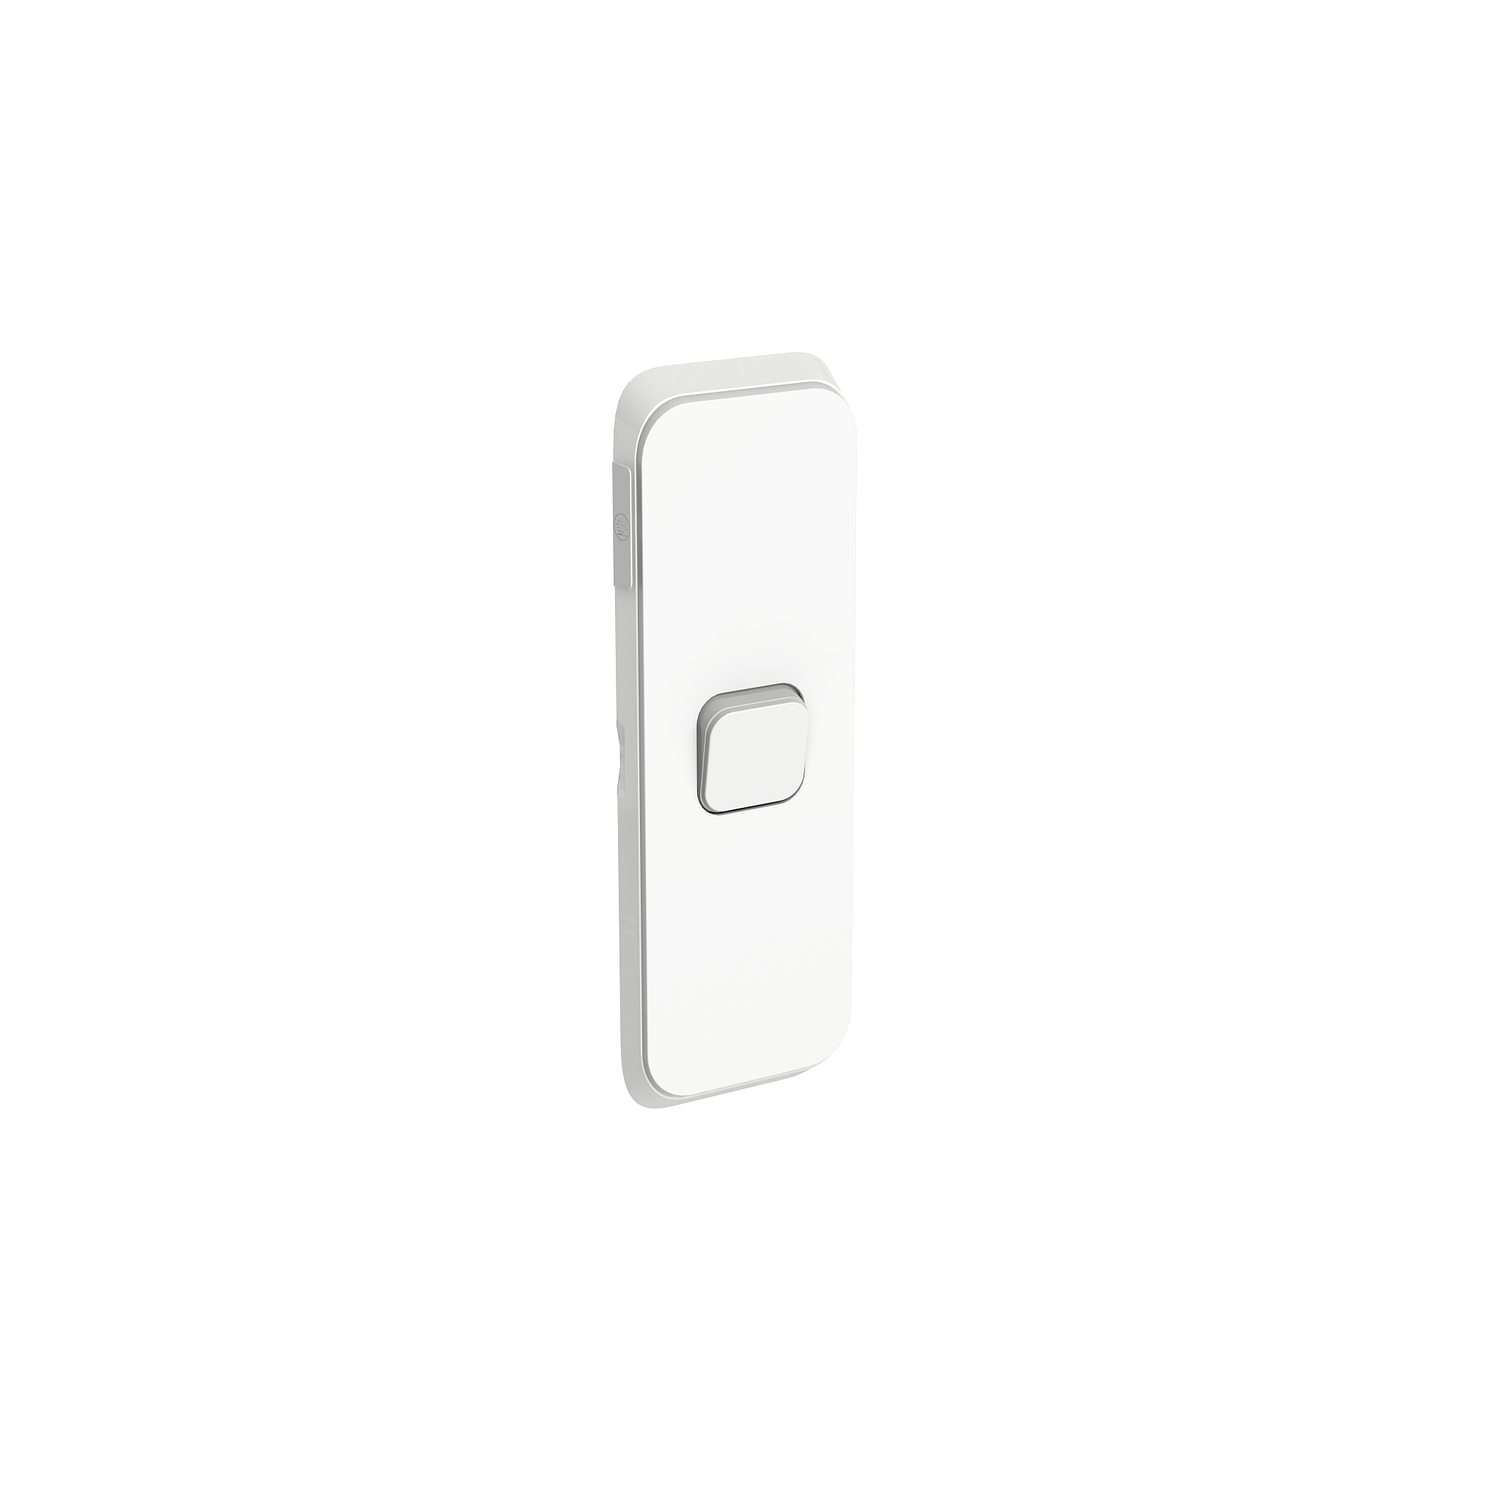 PDL Iconic - Cover Plate Switch Architrave 1-Gang - Vivid White